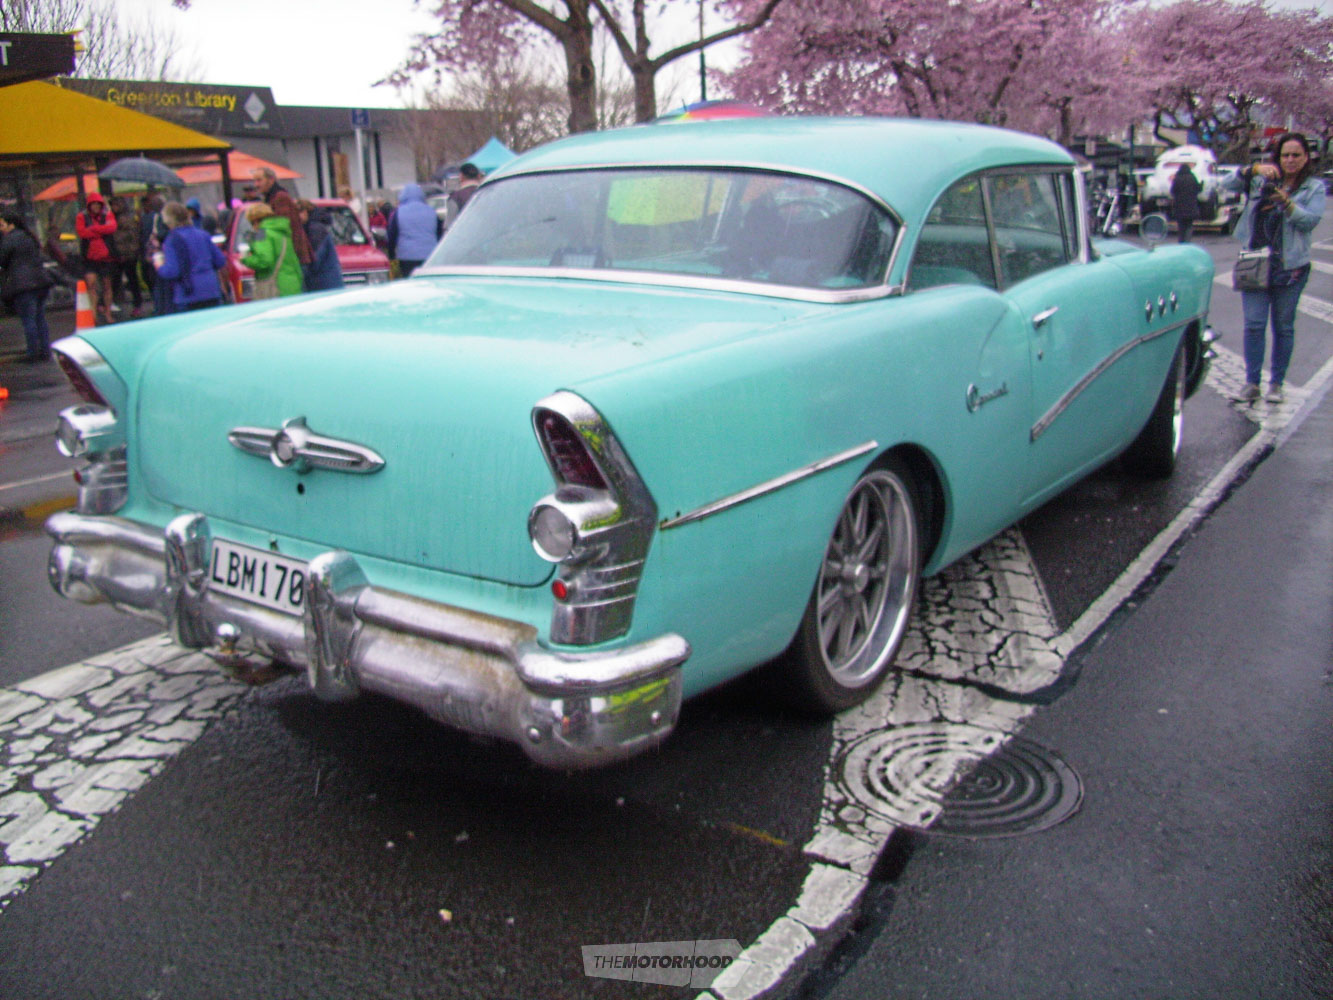 Ian Finch had a lot of little changes done to his 1955 Buick Riviera.jpg